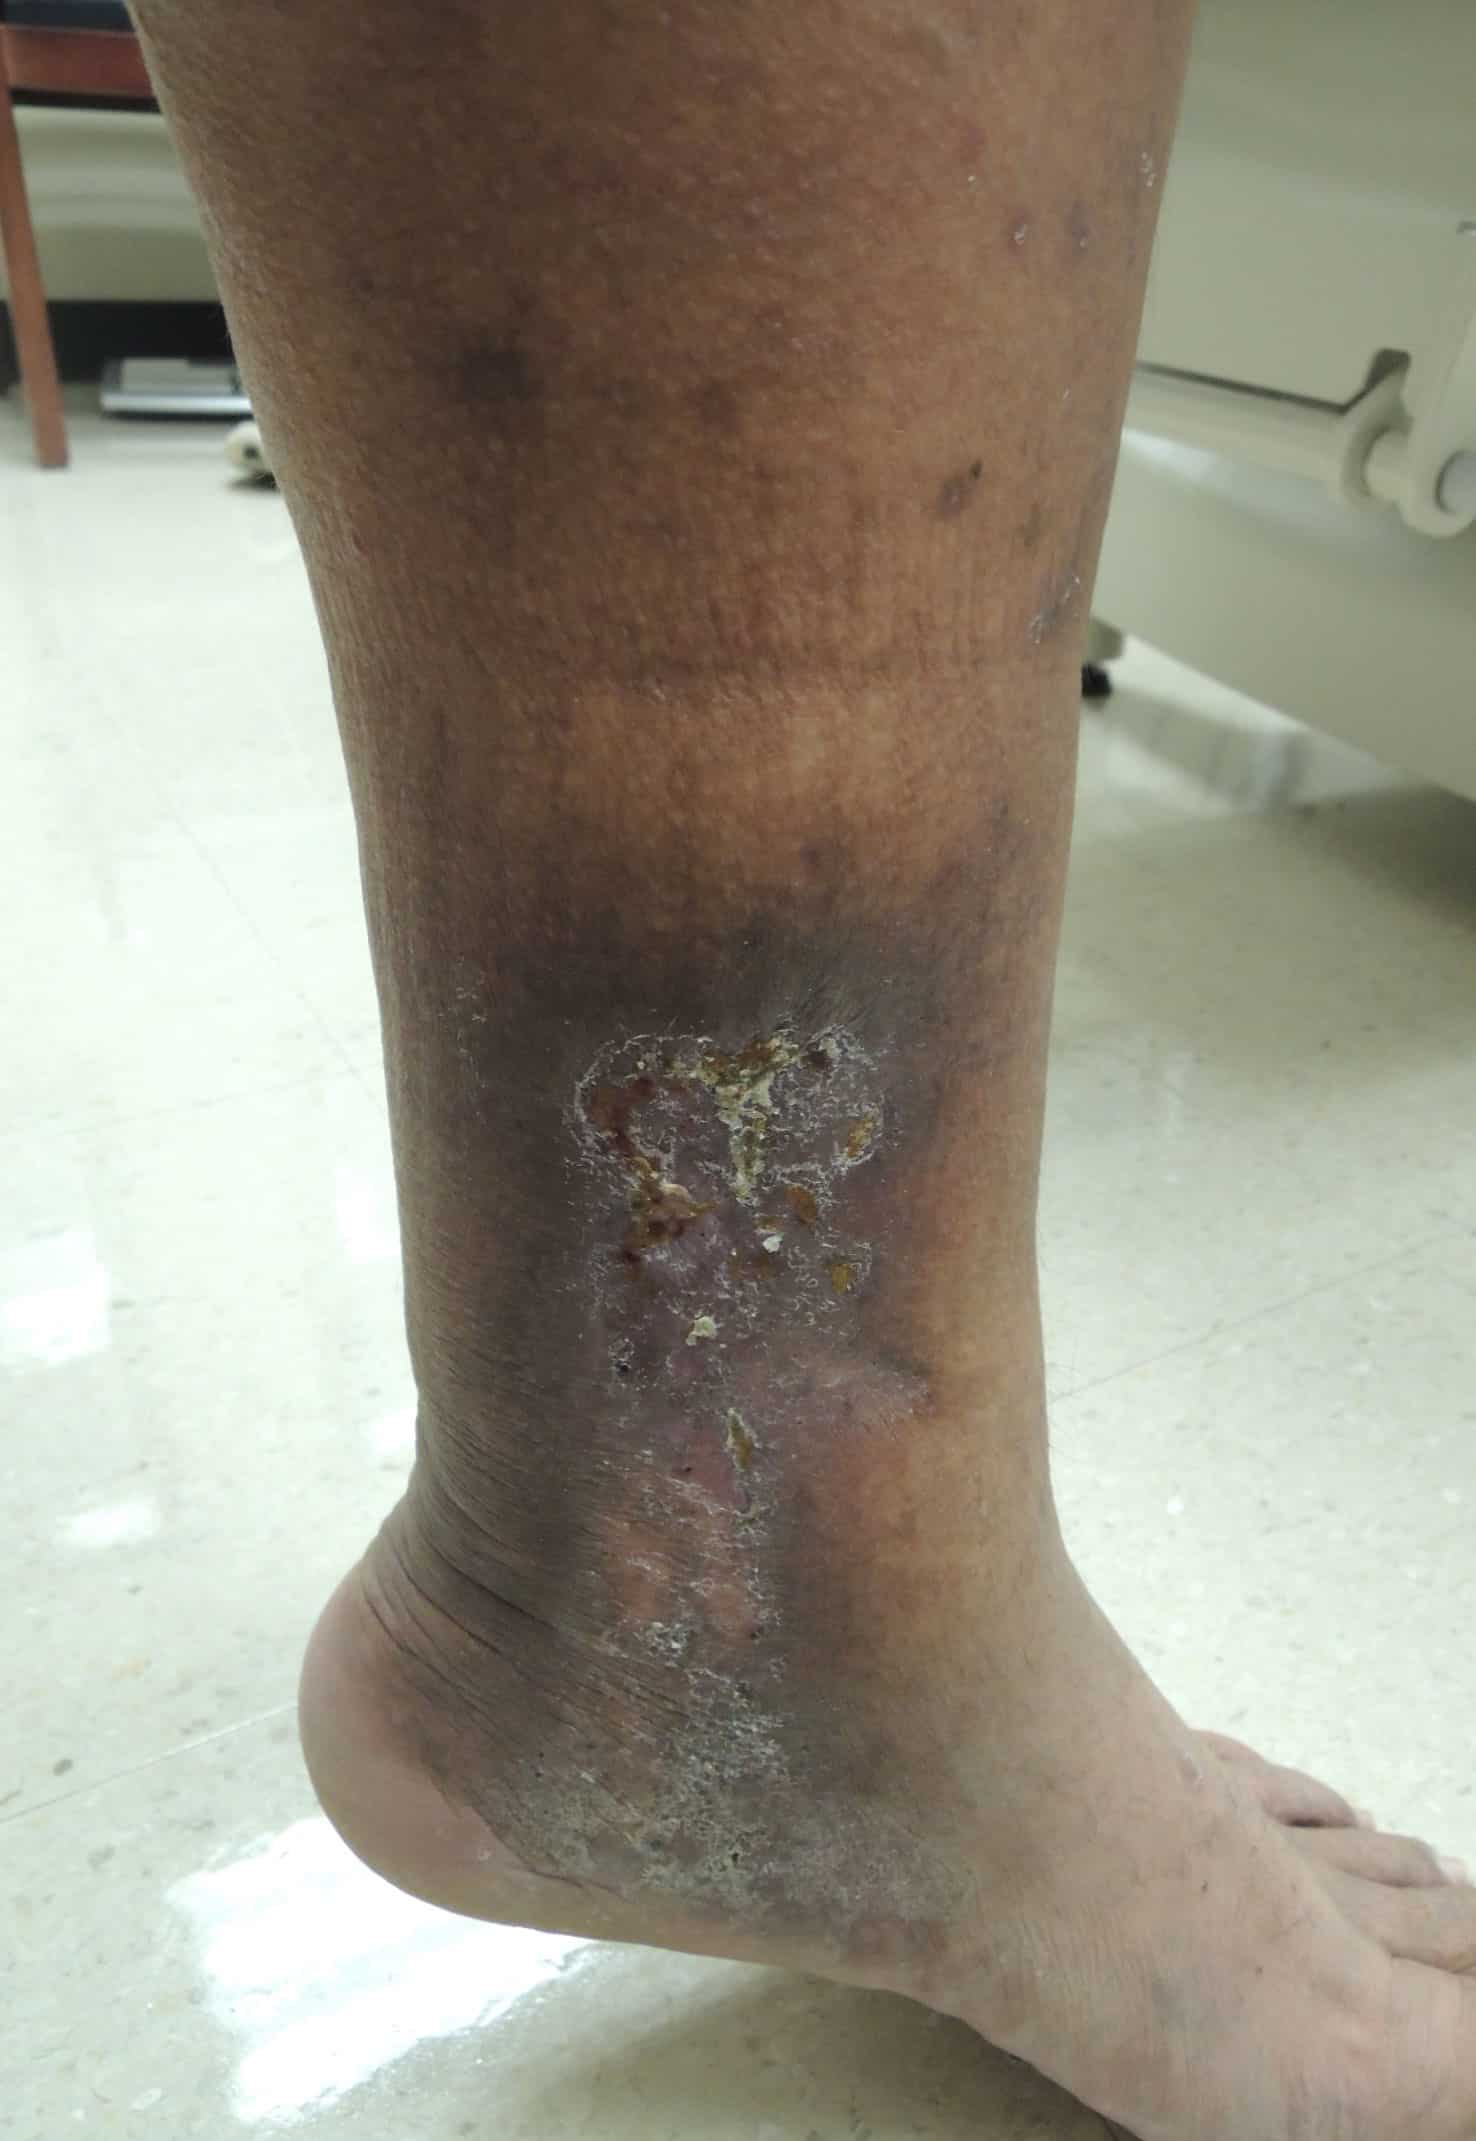 Skin changes associated with chronic venous insufficiency (CVI) Skin